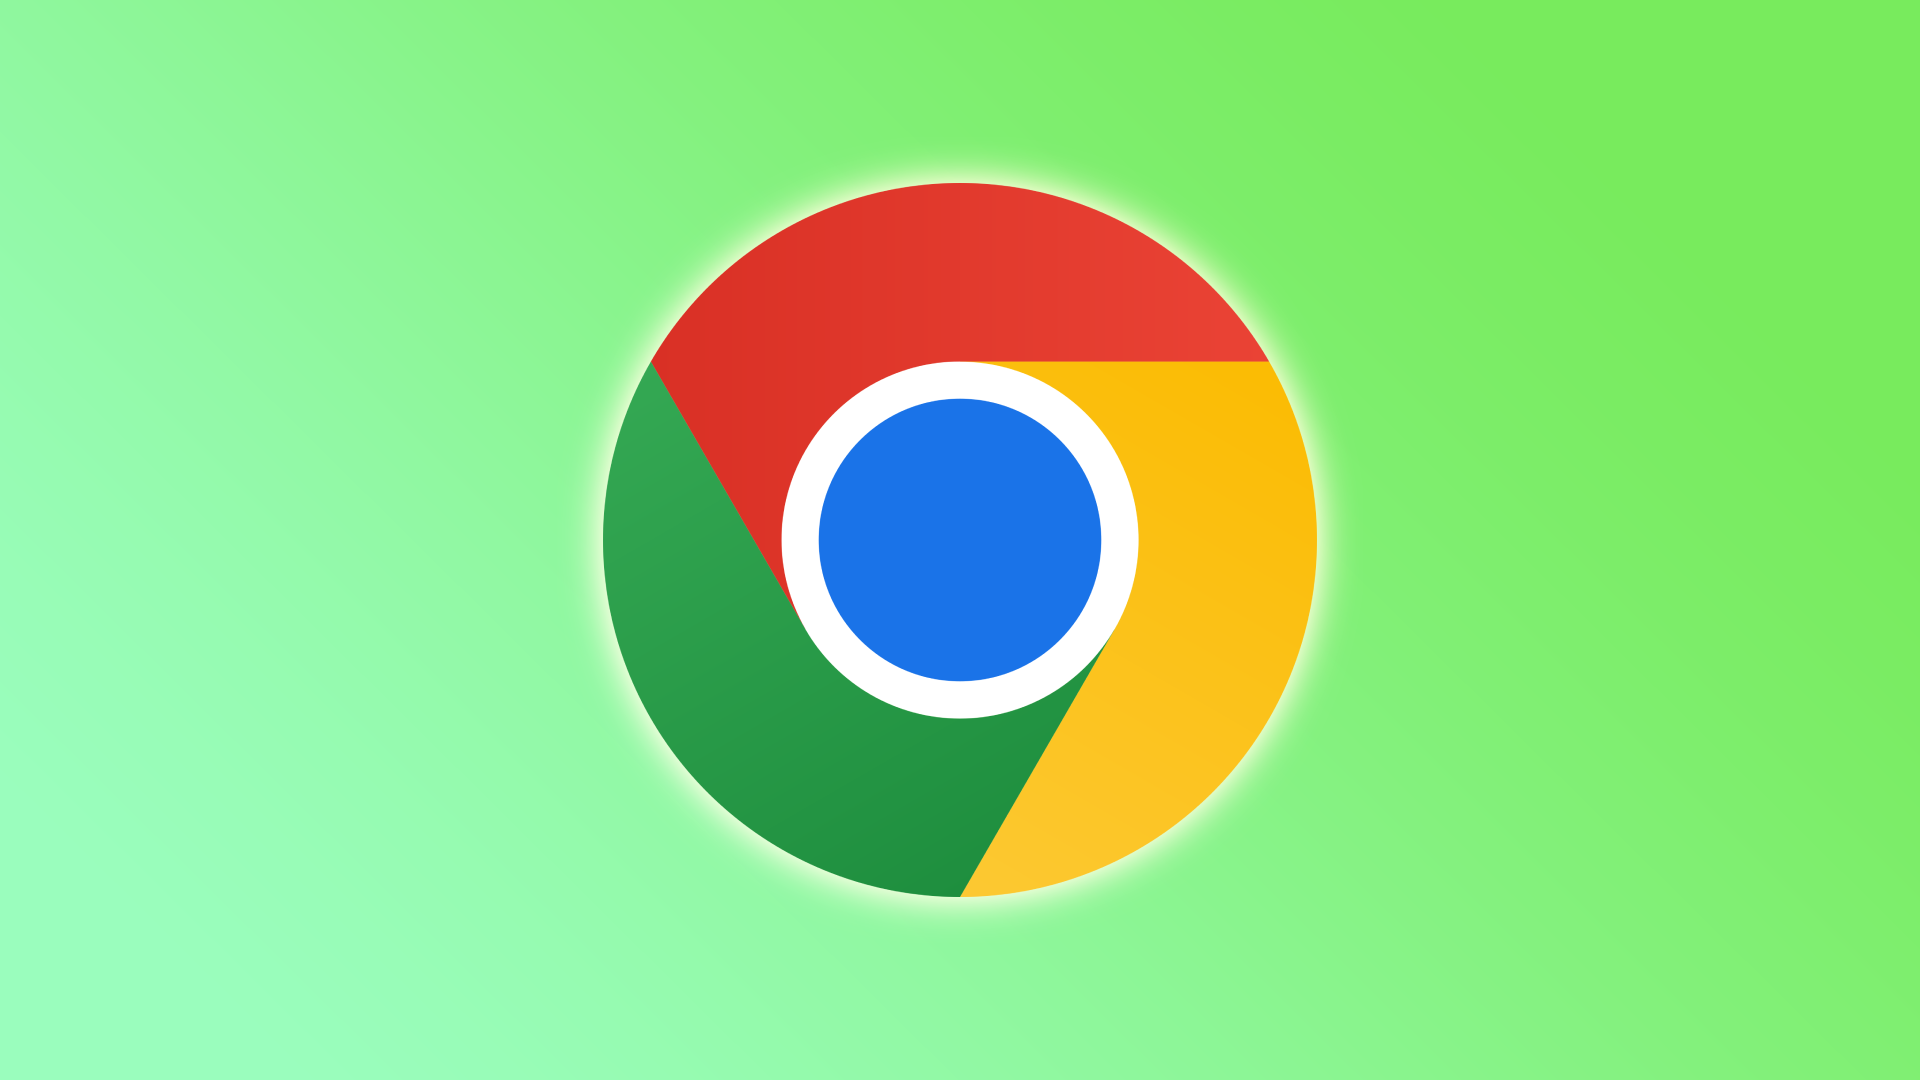 How to add shortcuts to the Google Chrome home screen